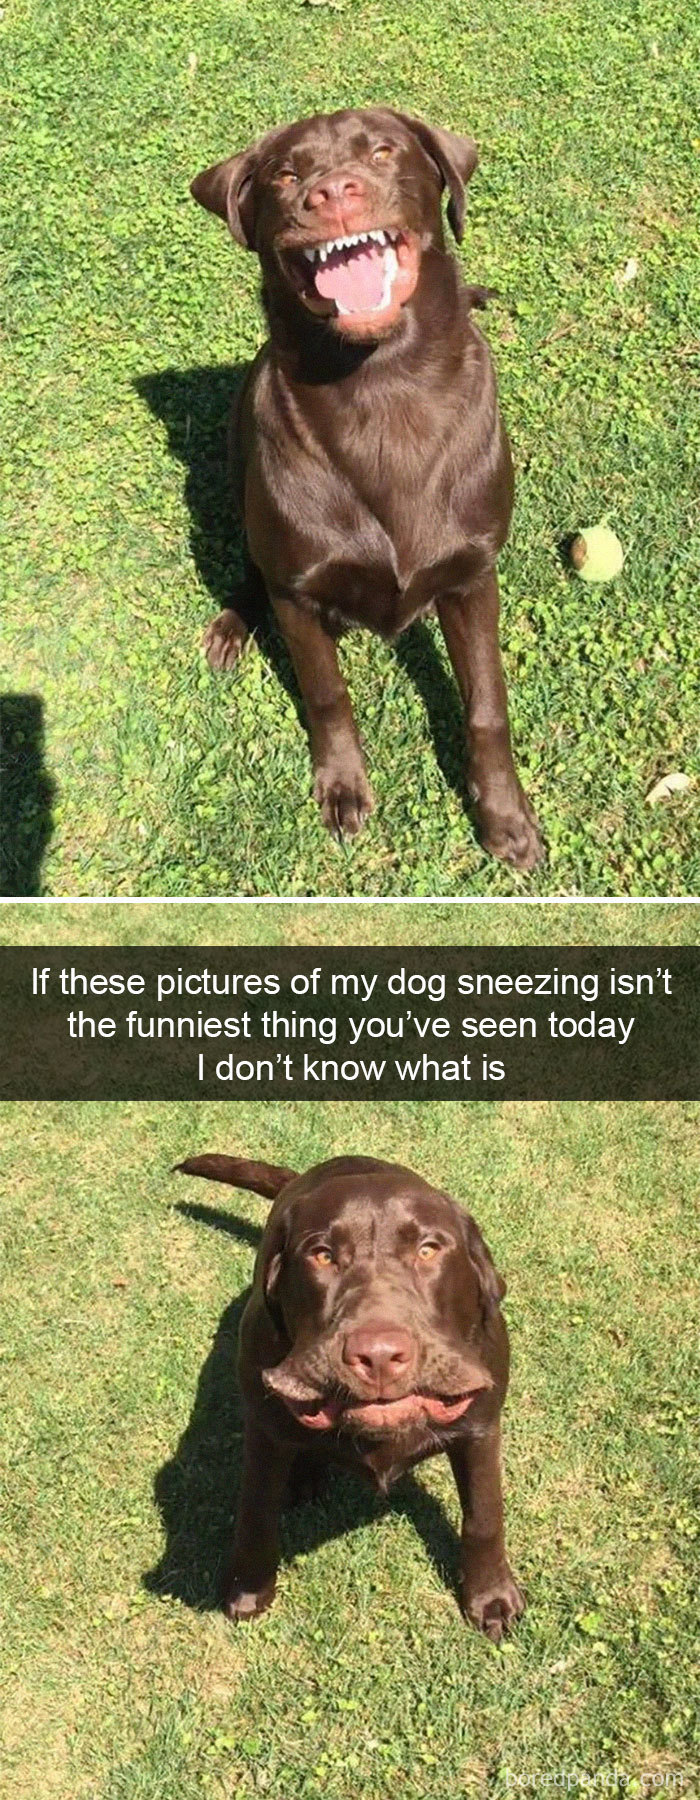 If These Pictures Of My Dog Sneezing Isn't The Funniest Thing You've Seen Today I Don't Know What Is